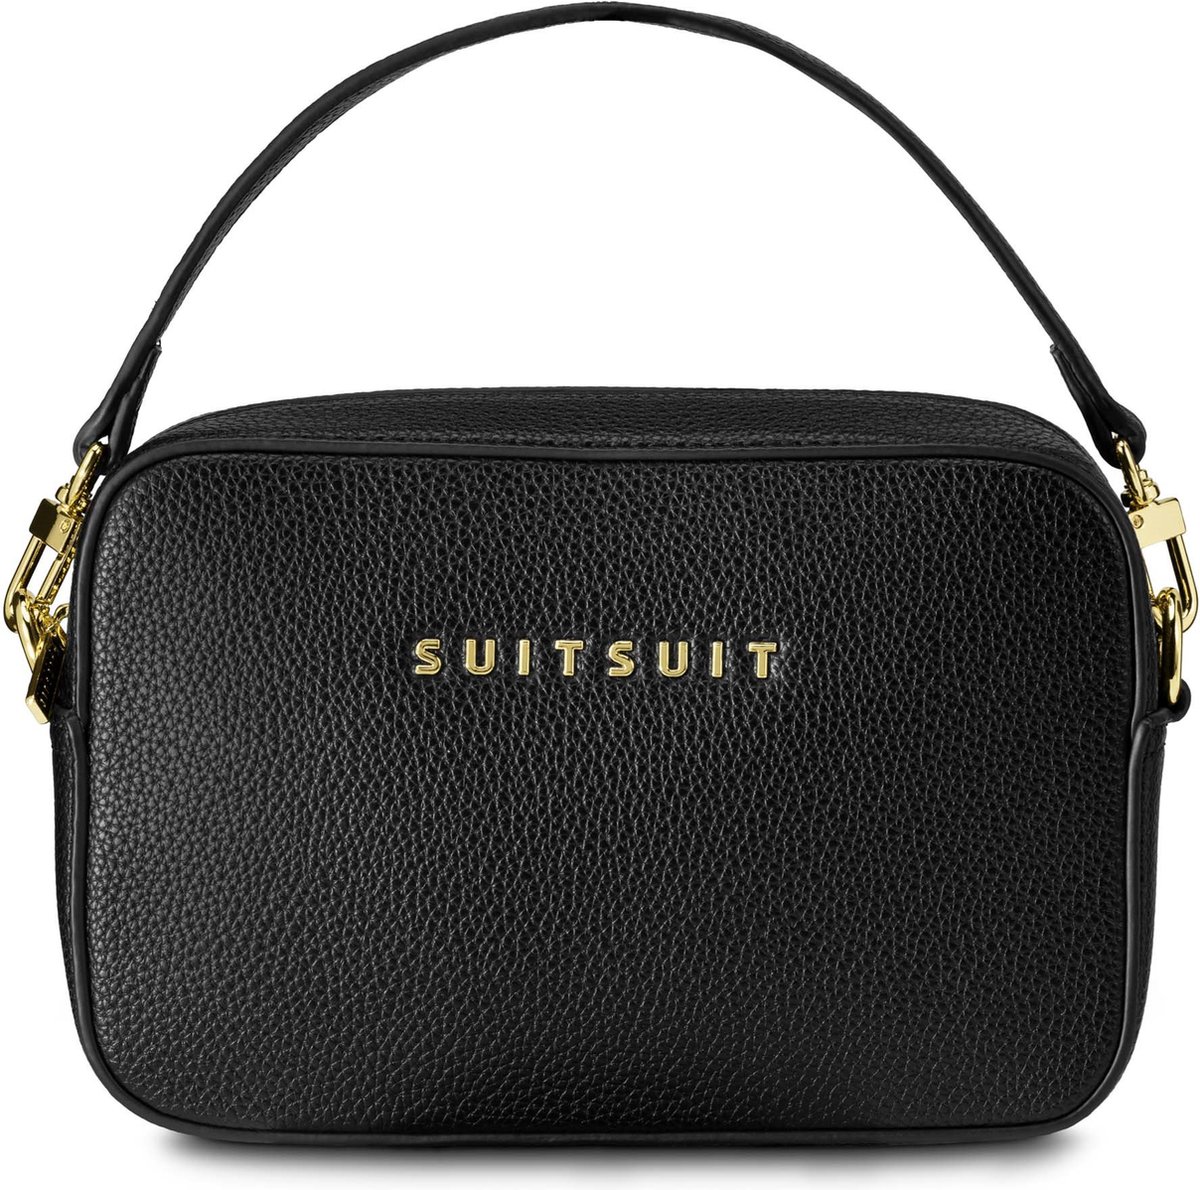 SUITSUIT - Black Gold - Special Edition - Crossbody Bag